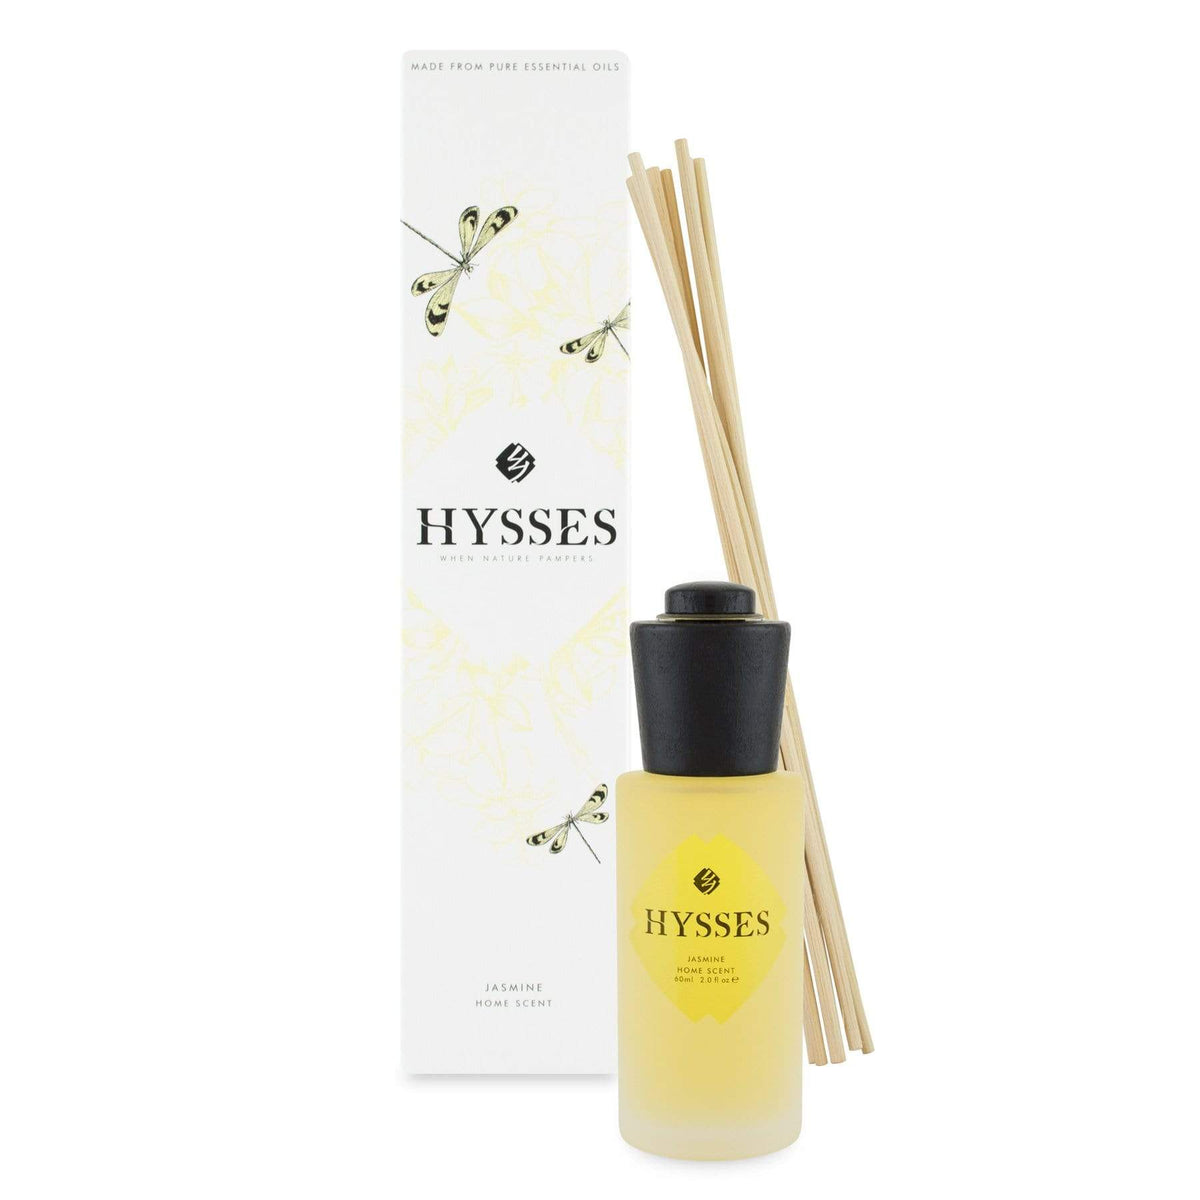 Hysses Home Scents 60ml Home Scent Reed Diffuser Jasmine